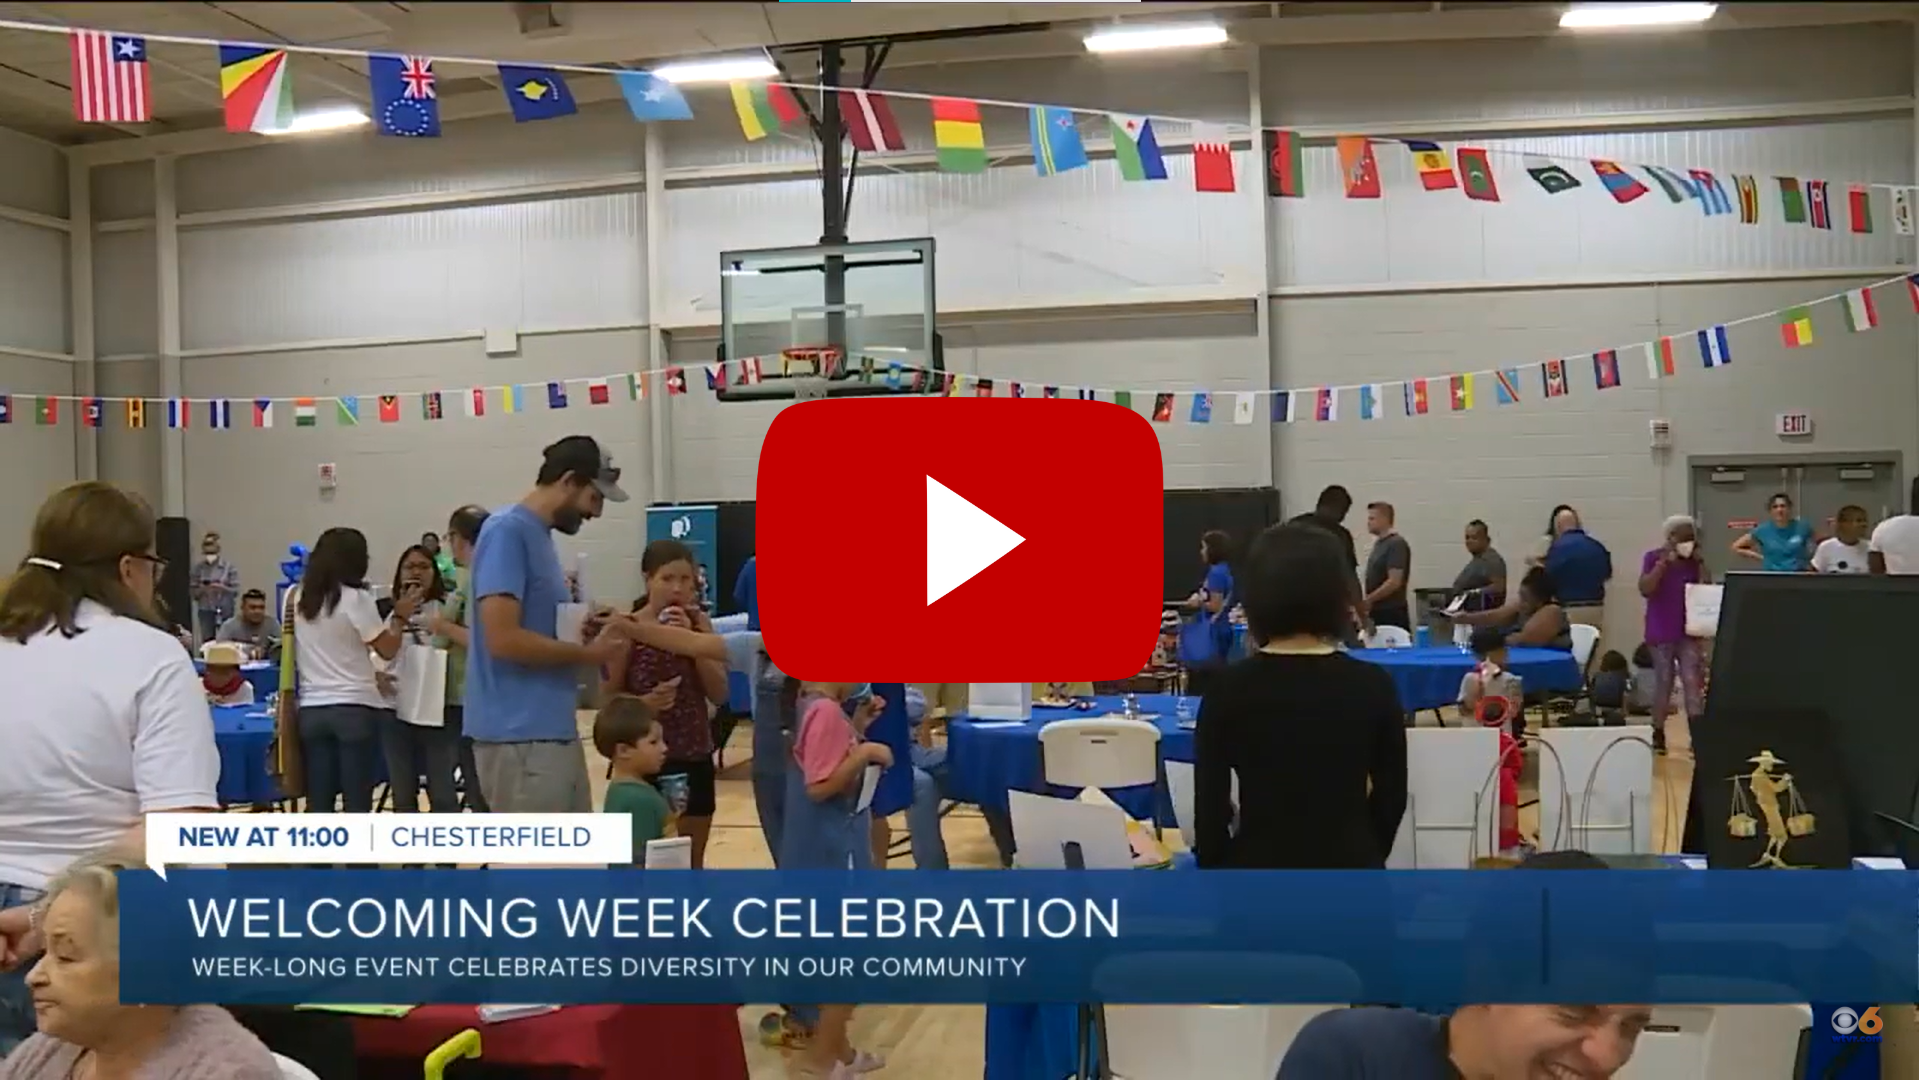 YouTube thumbnail for video titled "Welcoming Week at YMCA aims to connect and celebrate"